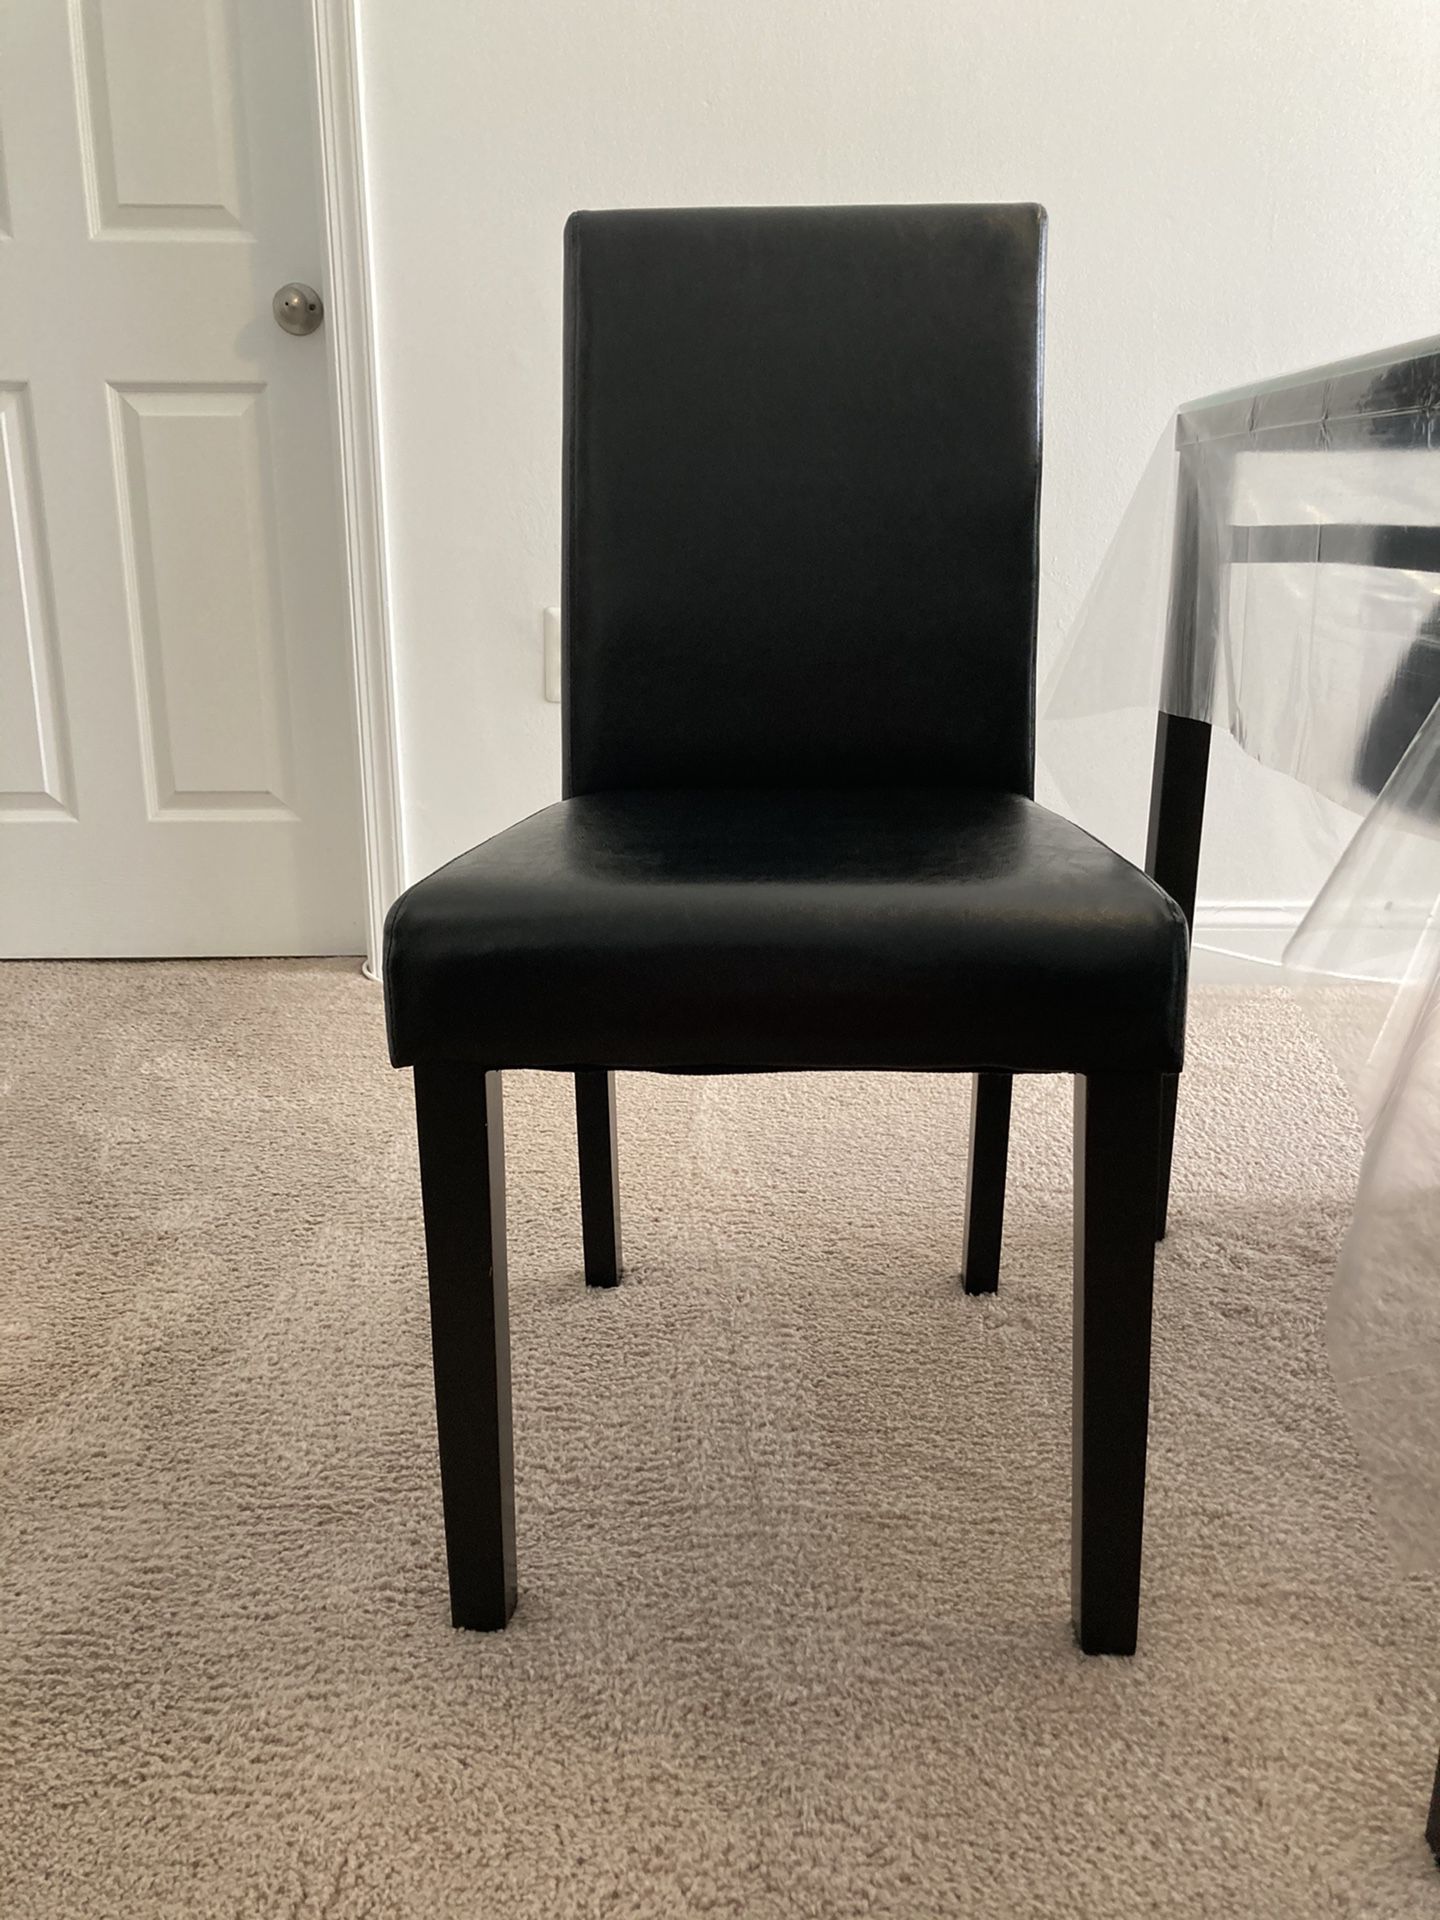 2 Brand new black leather chairs